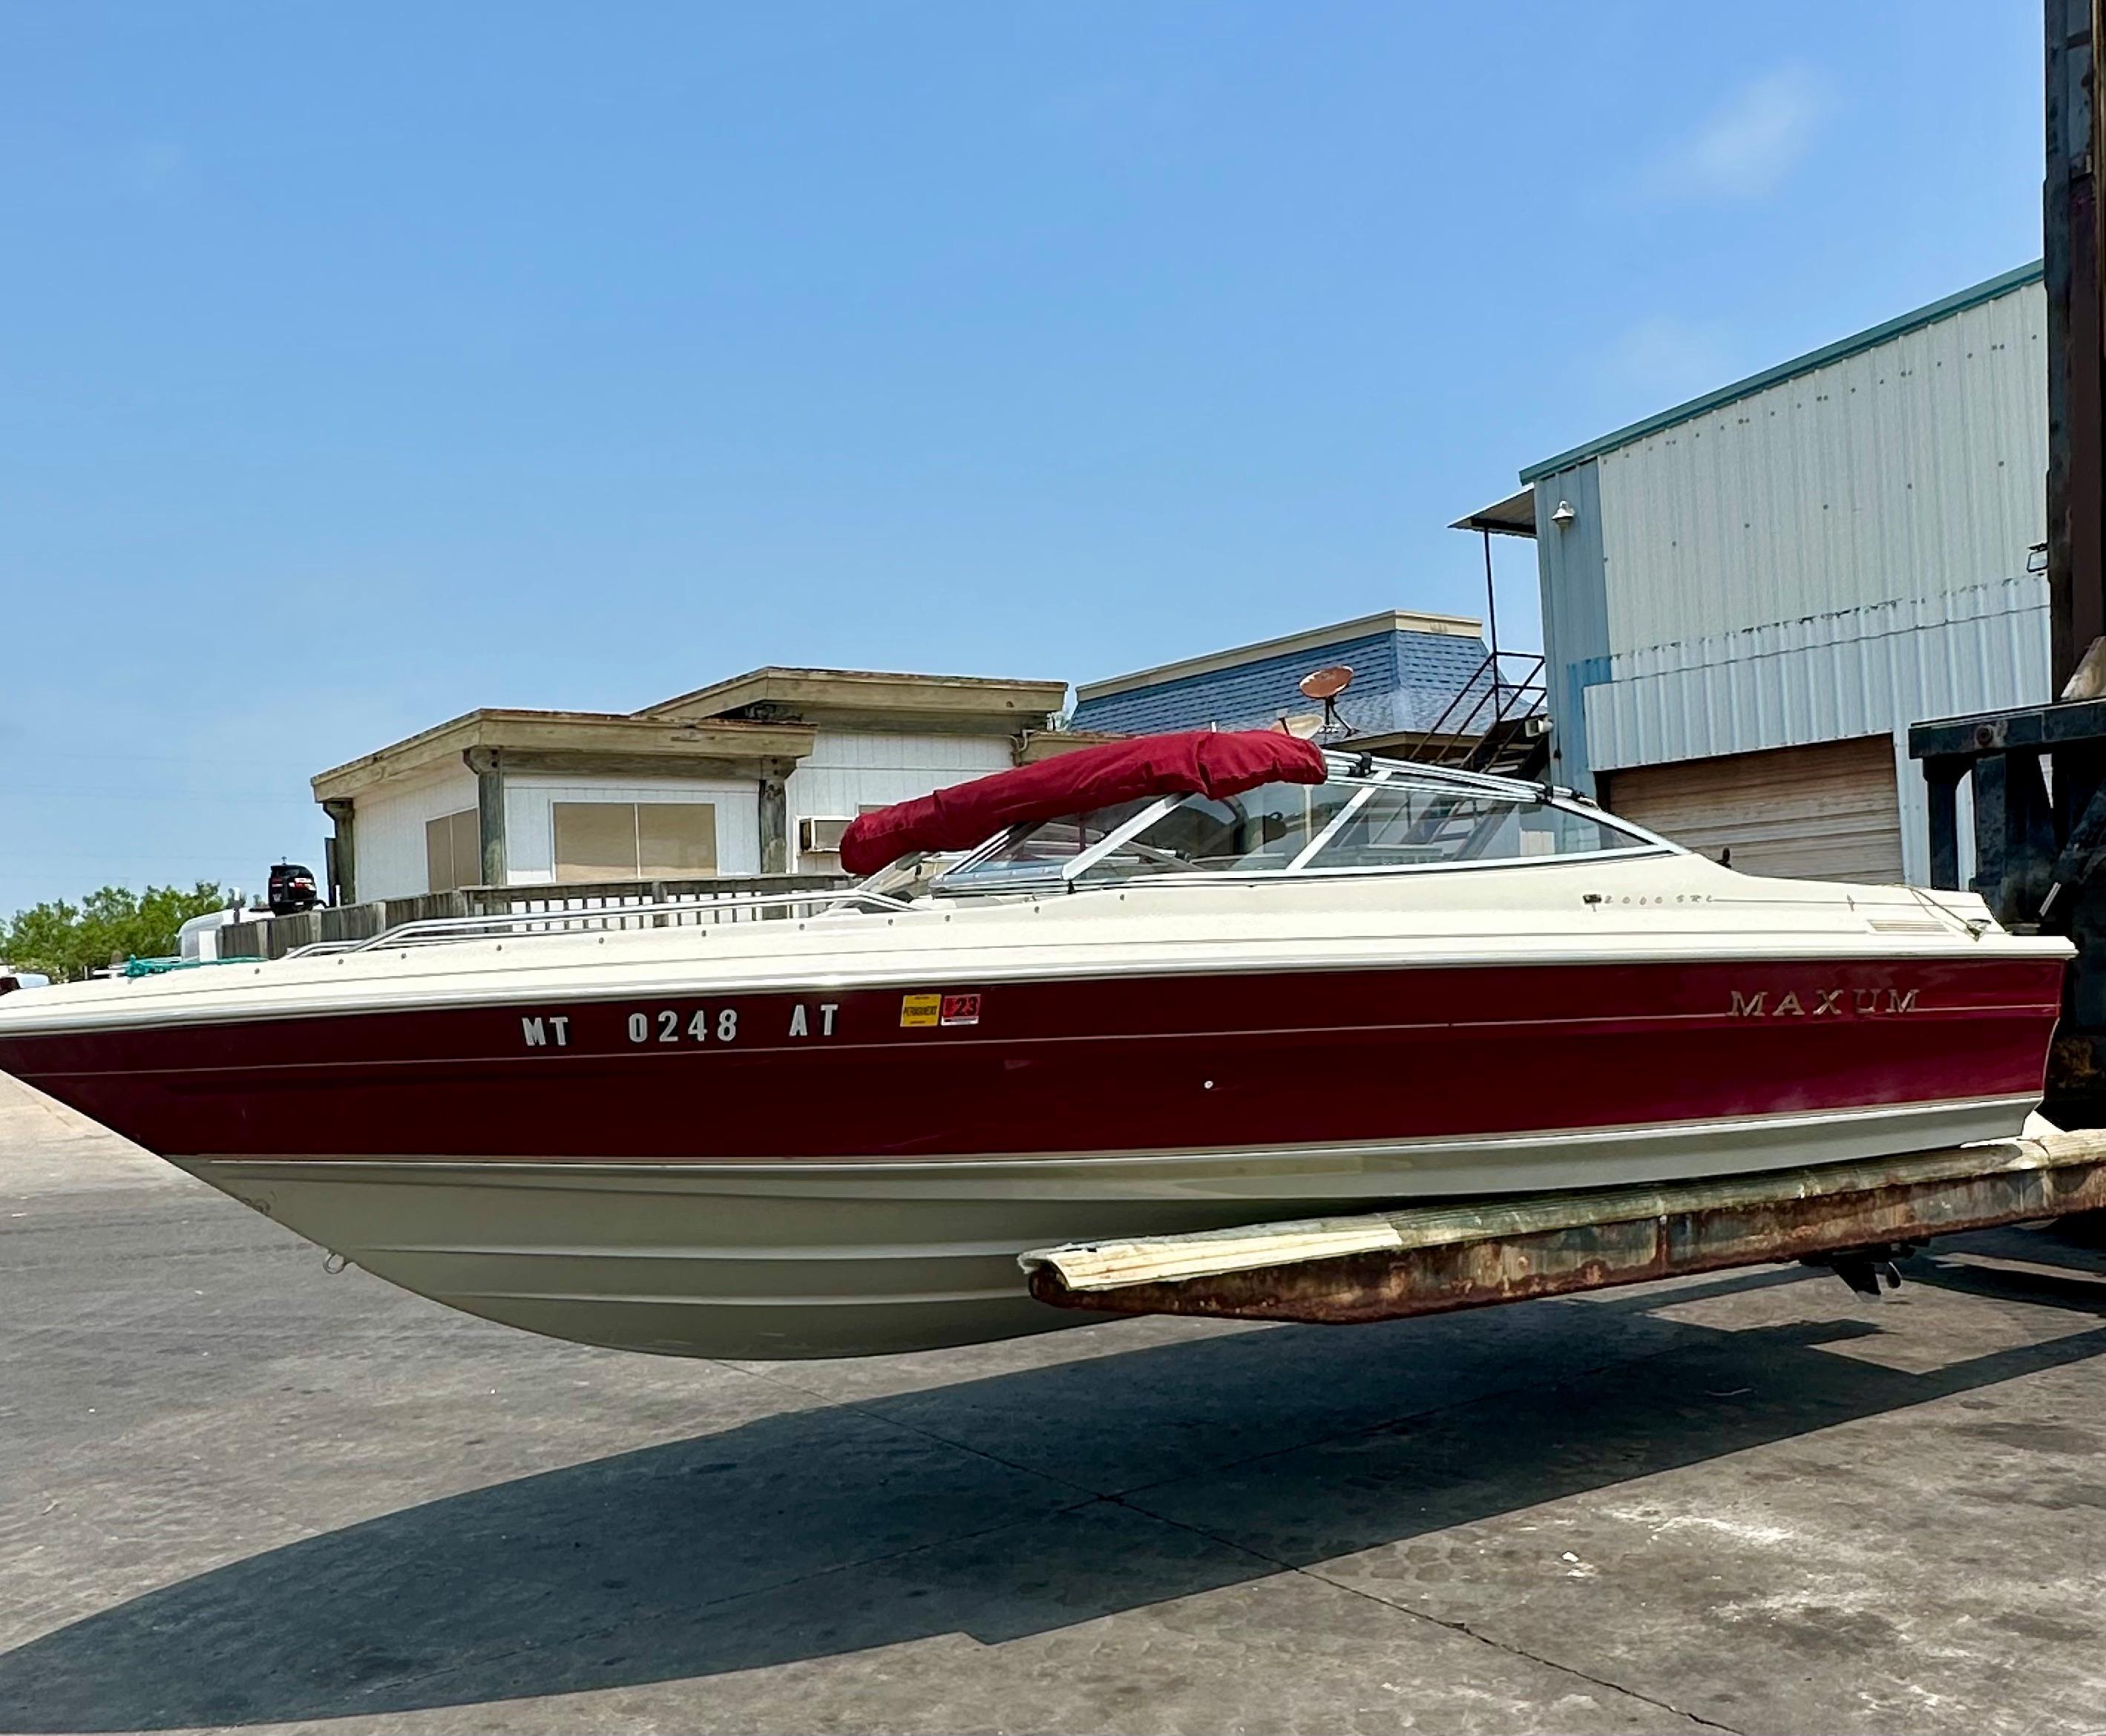 For sale boat Maxum 2100sr, 1996 250 hp with low mileage. Performed all maintenance, oil change, fil - 1